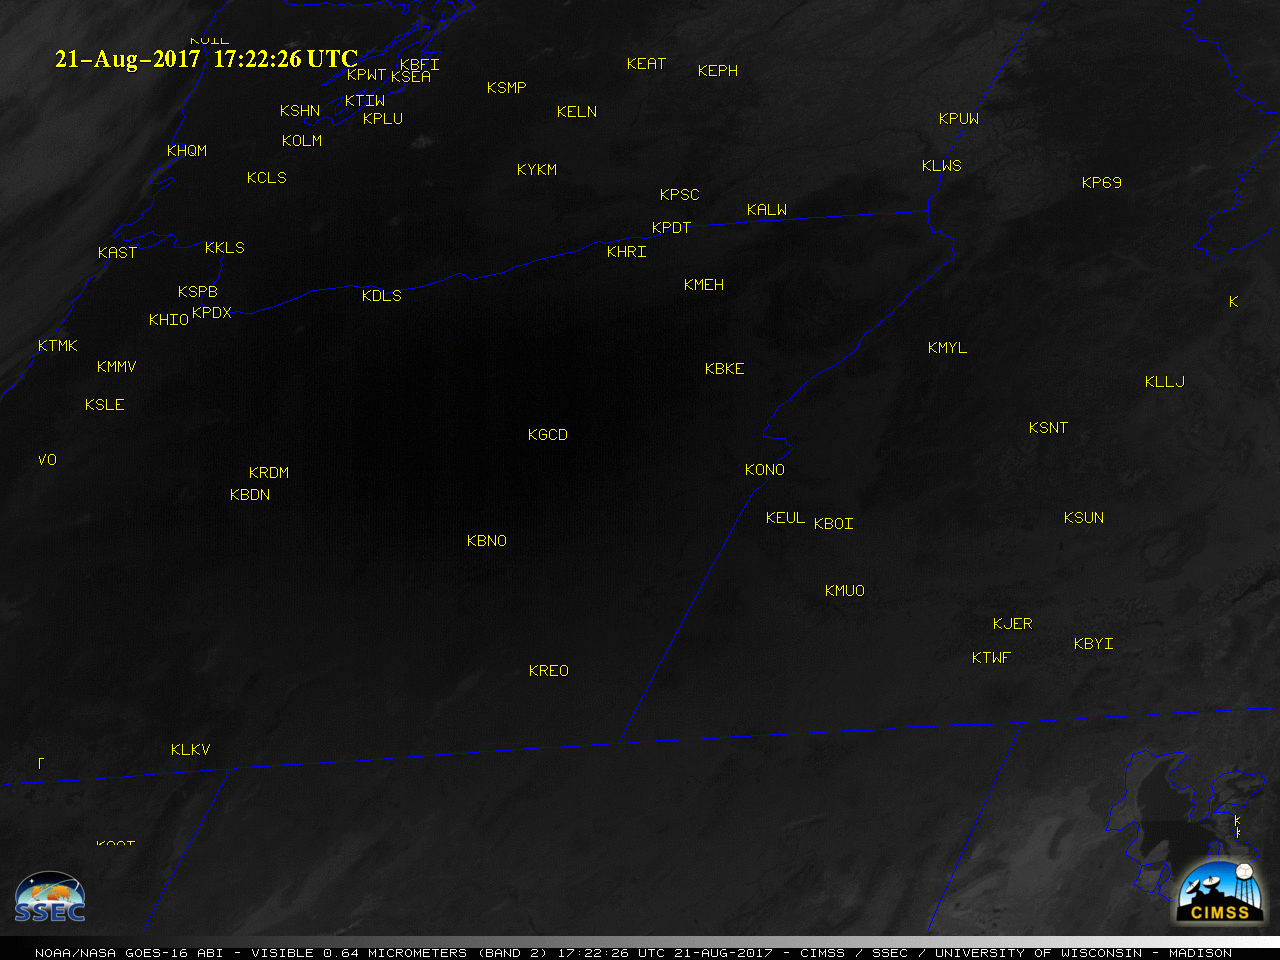 GOES-16 "Red" Visible (0.64 µm) images, with station identifiers plotted in yellow [click to play animation]